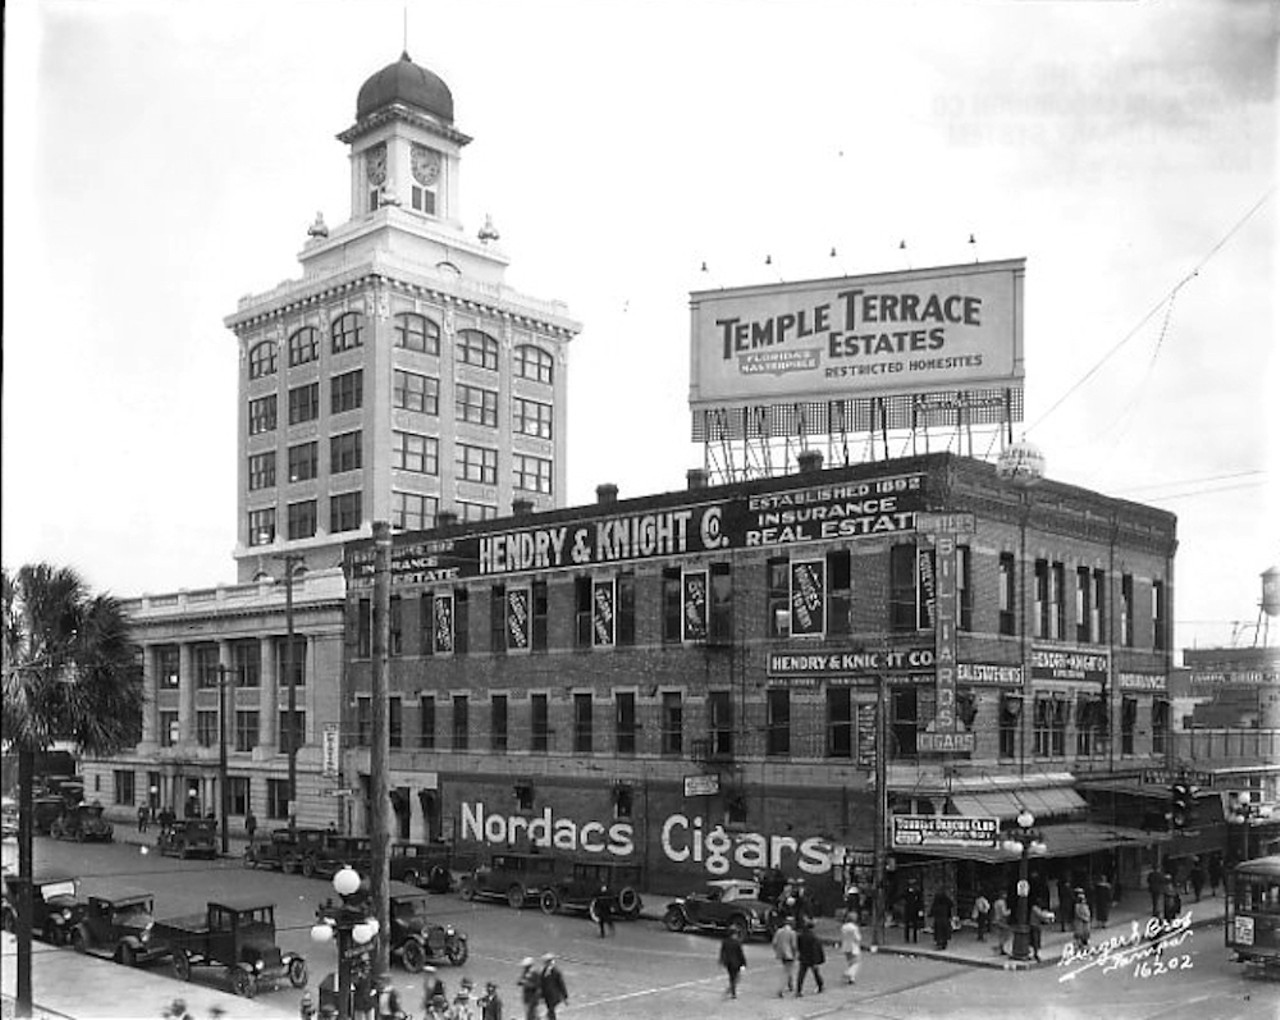 Then&#151;circa 1920s
Downtown Tampa
Photo courtesy City of Tampa